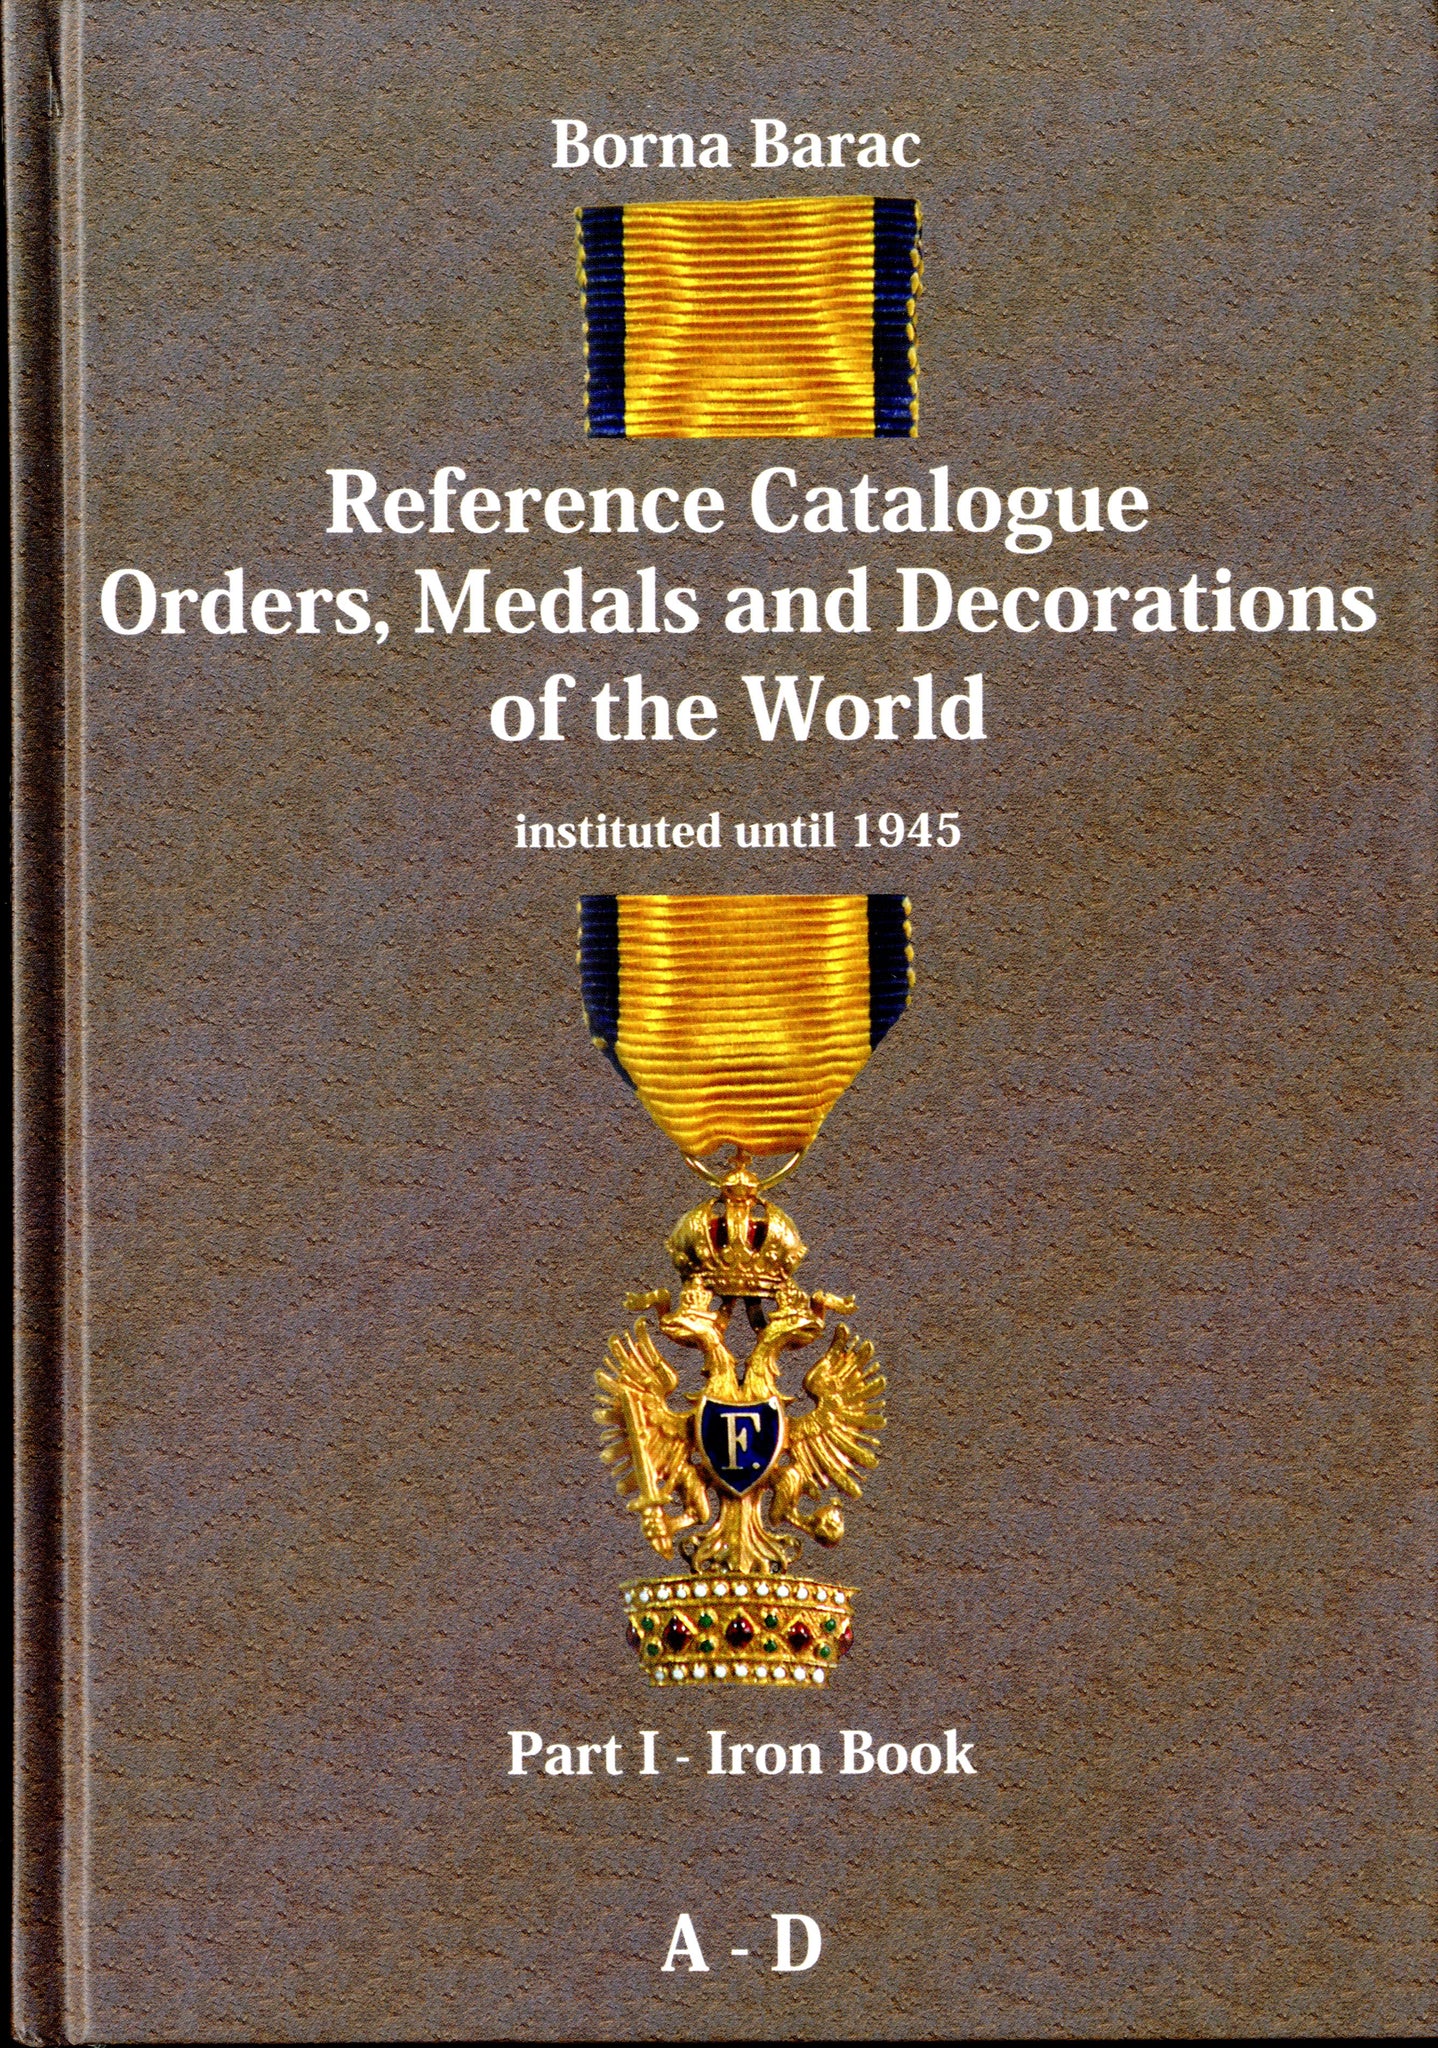 Reference Catalogue Orders, Medals and Decorations of the World Part I - Iron Book A - D by Barac, B.